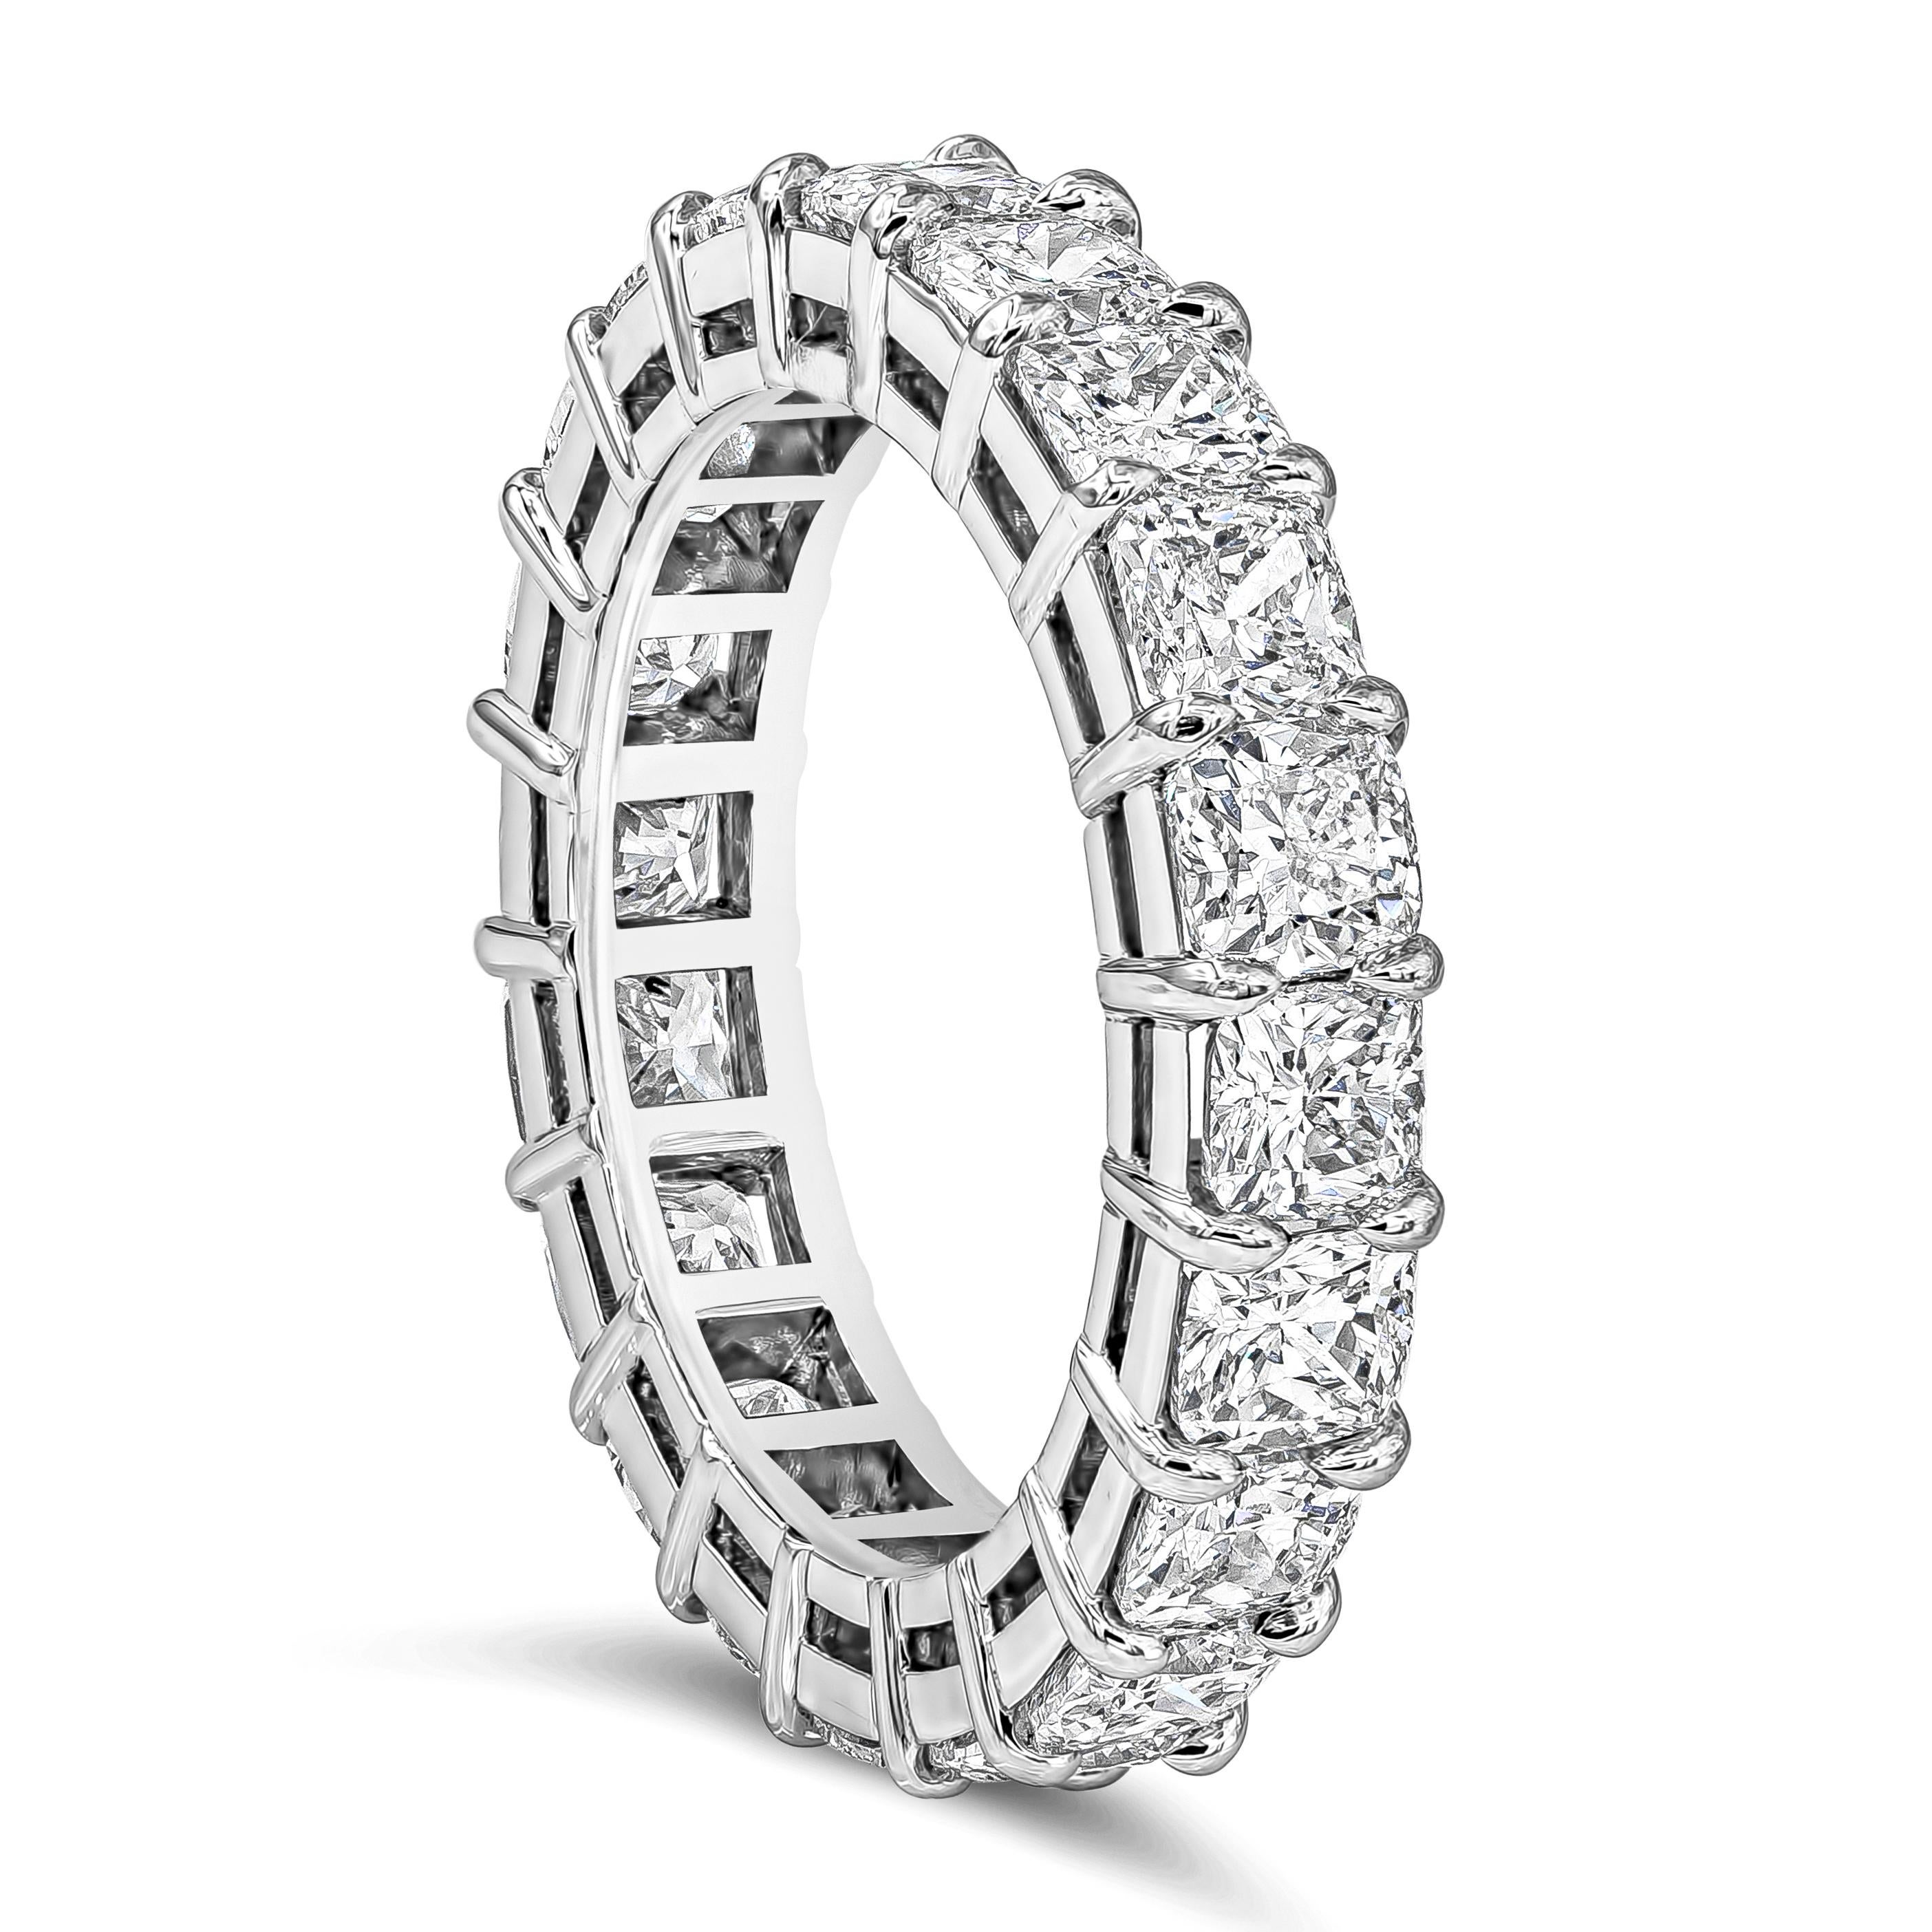 A classic and fine quality wedding band system handcrafted by Roman Malakov Diamonds in New York City. Showcasing a row of brilliant cushion cut diamonds weighing 5.06 carats total, F+ Color and VS+ in Clarity, shared prong basket setting. Set in an